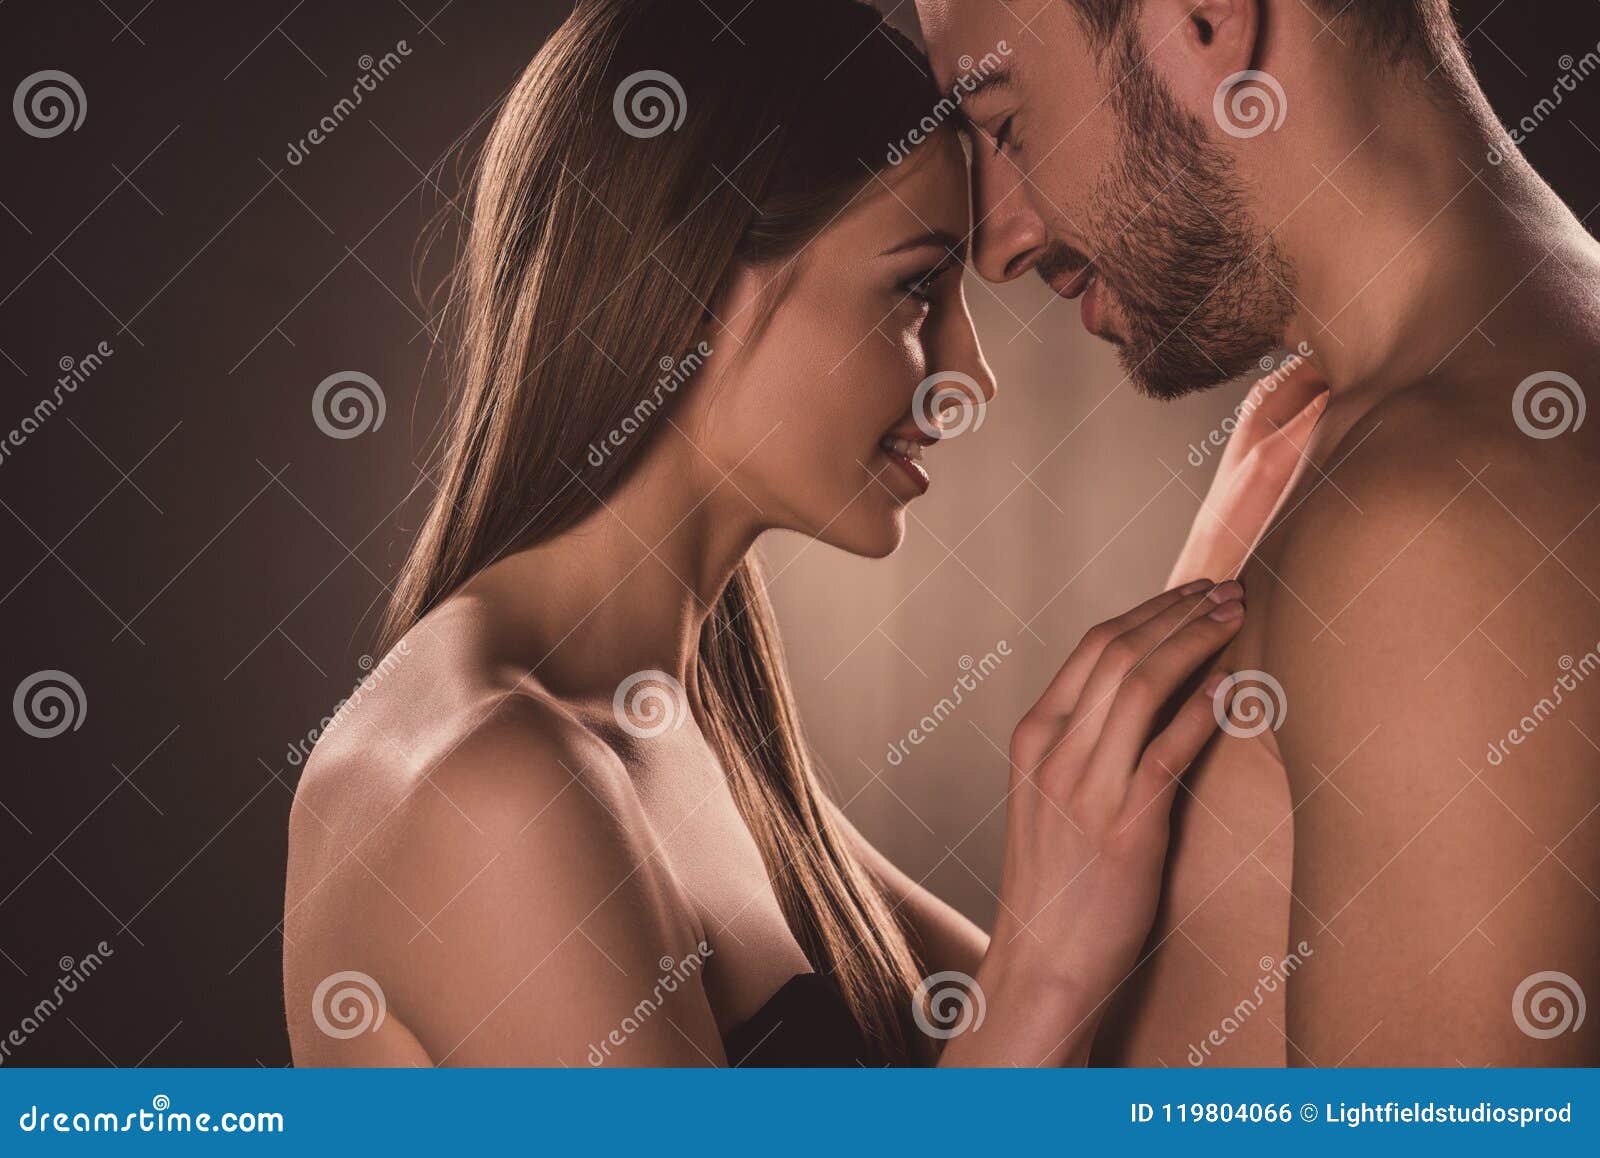 Happy Nudist Couples - Happy Sensual Couple Hugging Together, Stock Photo - Image of sensuality,  relationship: 119804066